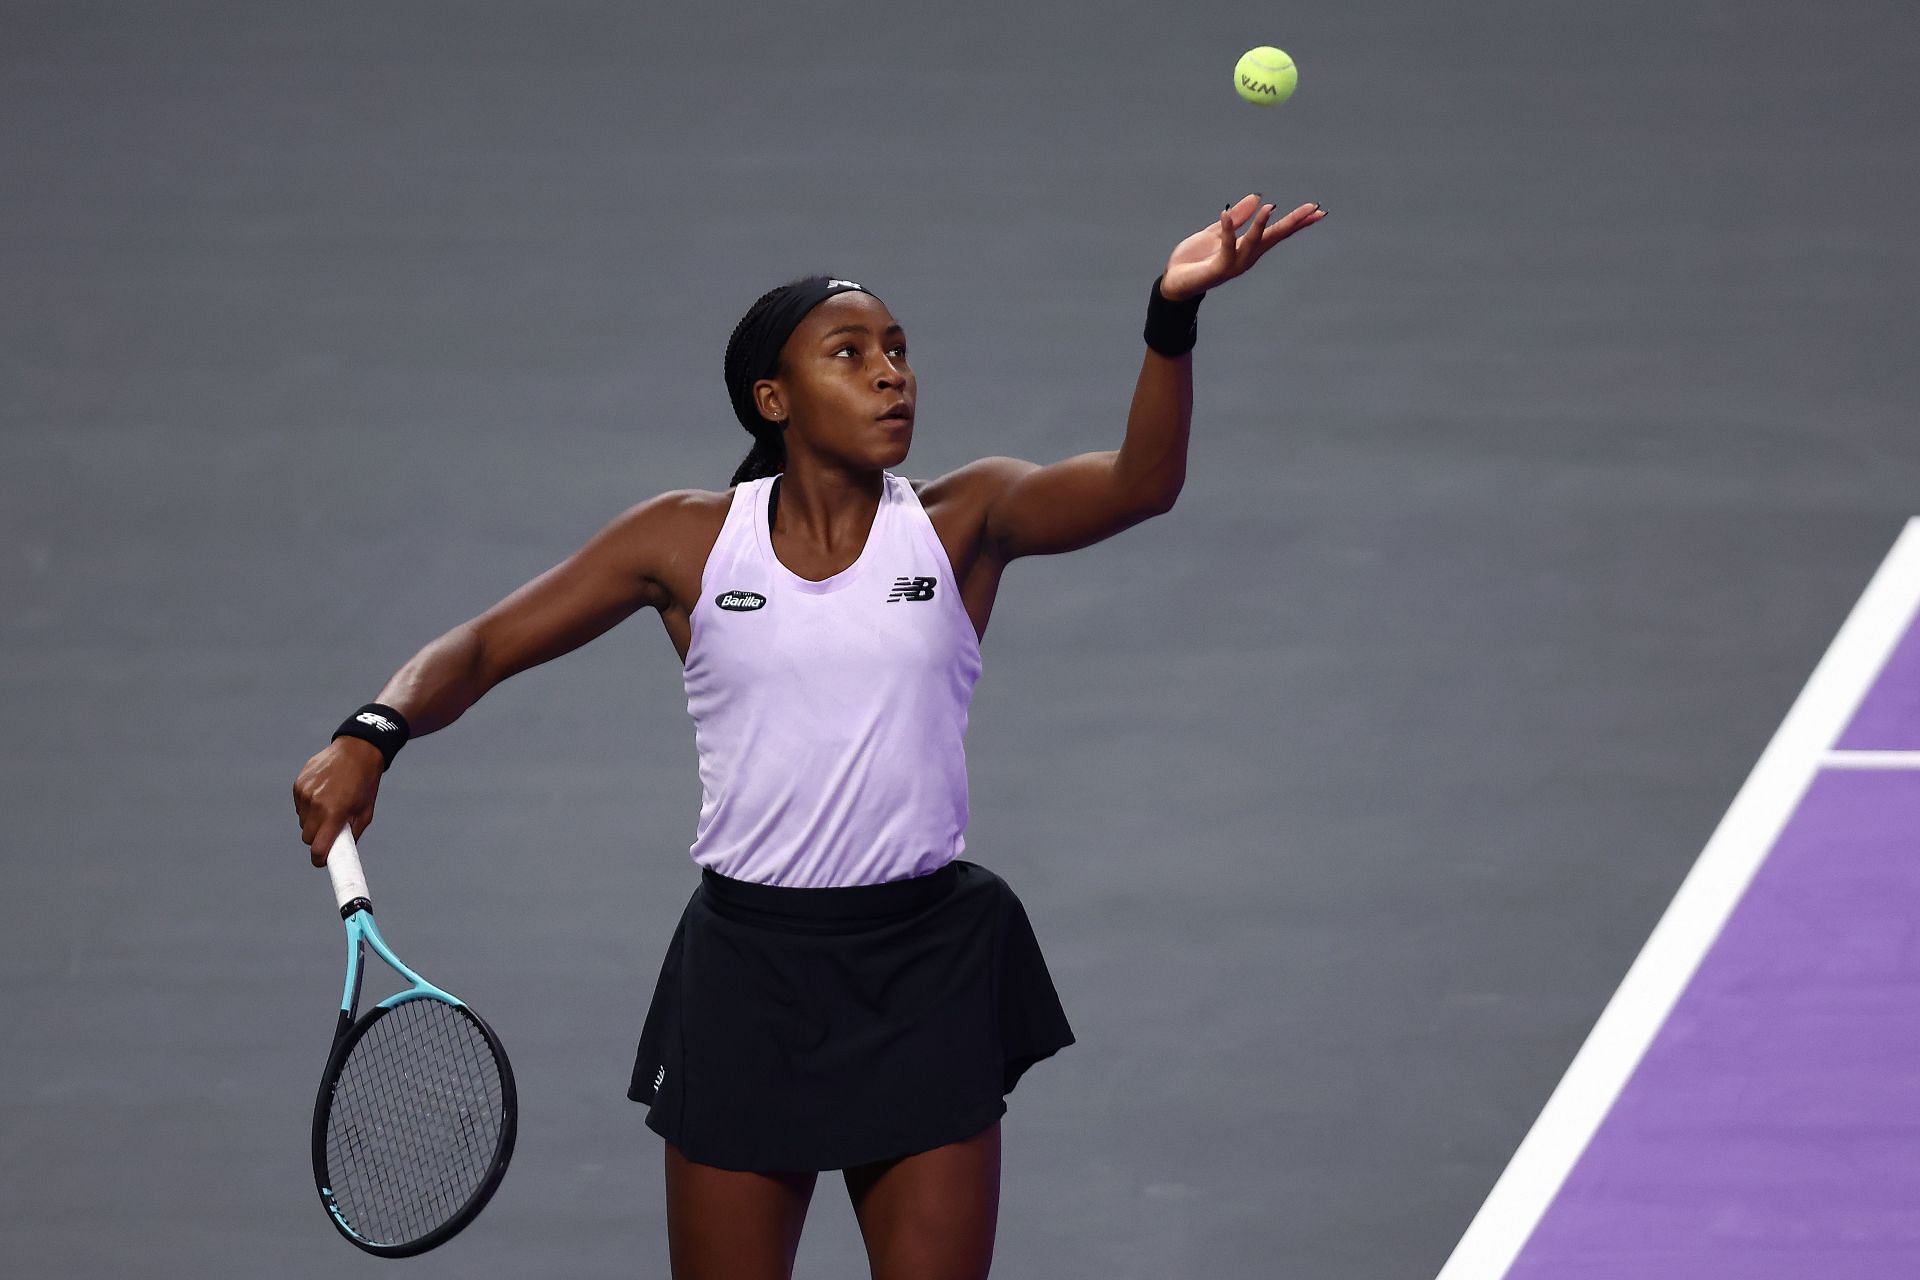 Coco Gauff qualified for the 2022 WTA Finals in both singles and doubles.